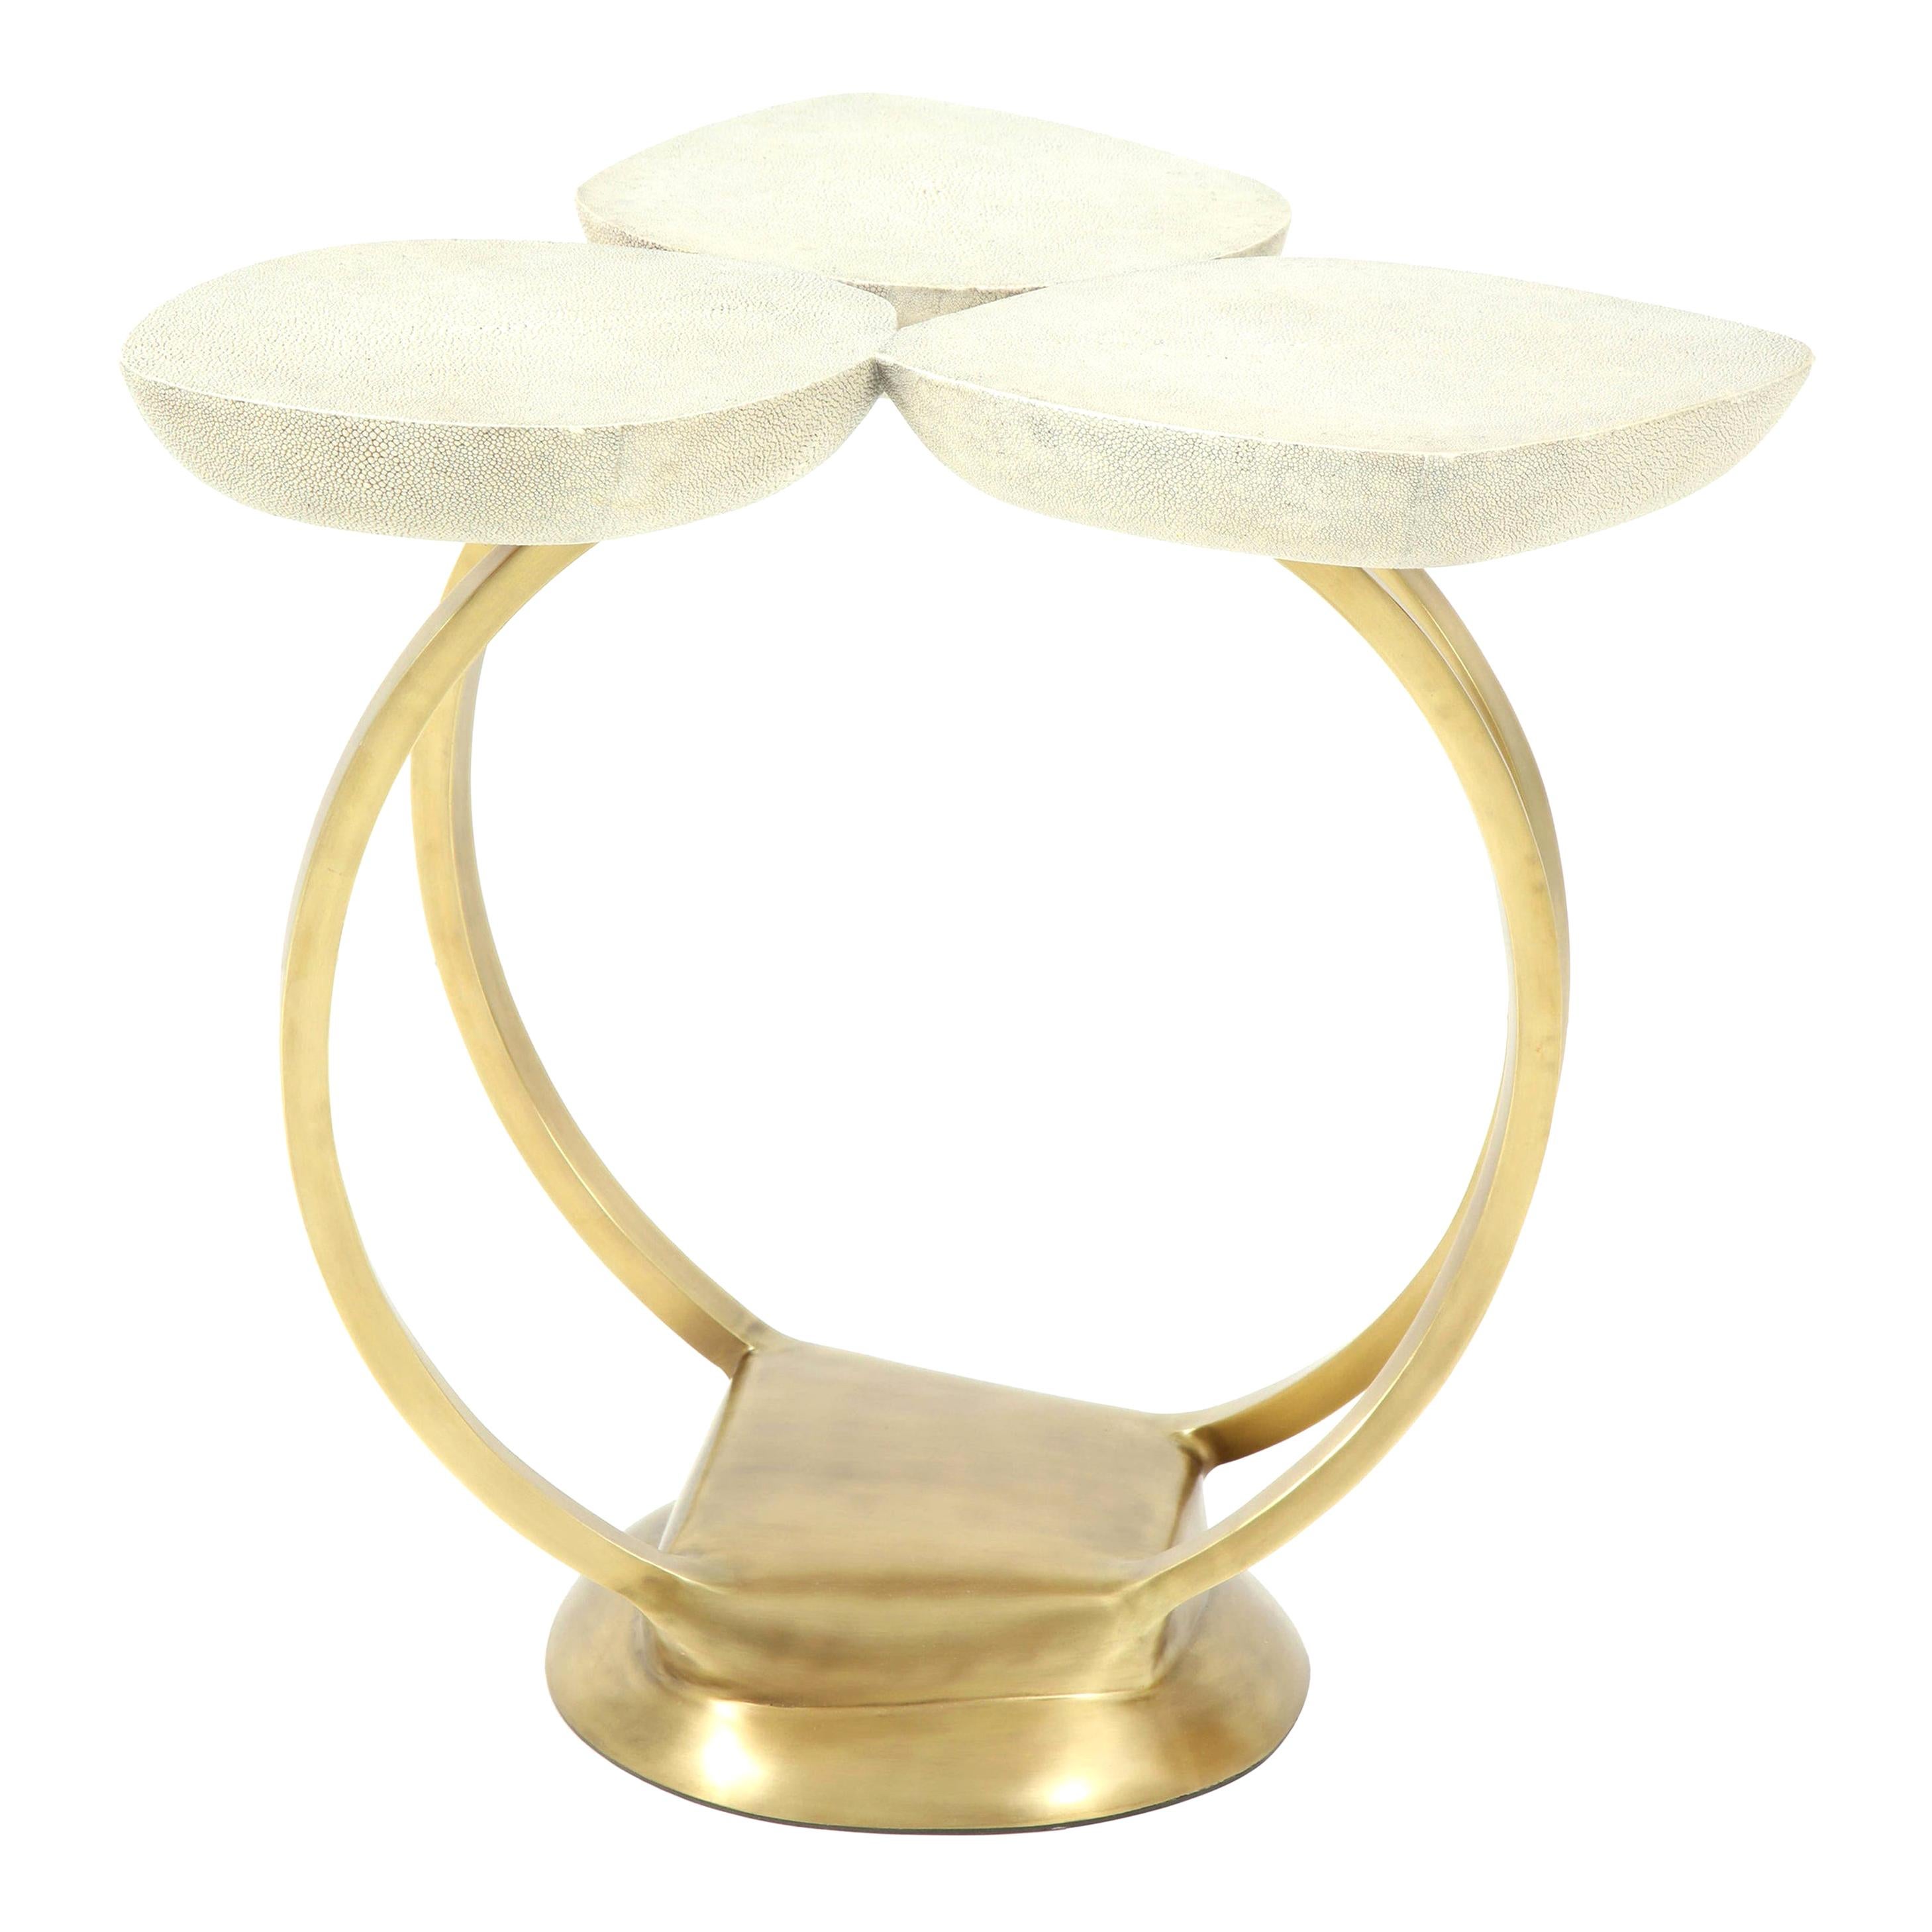 Shagreen Side Table with Brass Base, Cream Shagreen, Contemporary, Floral Design For Sale